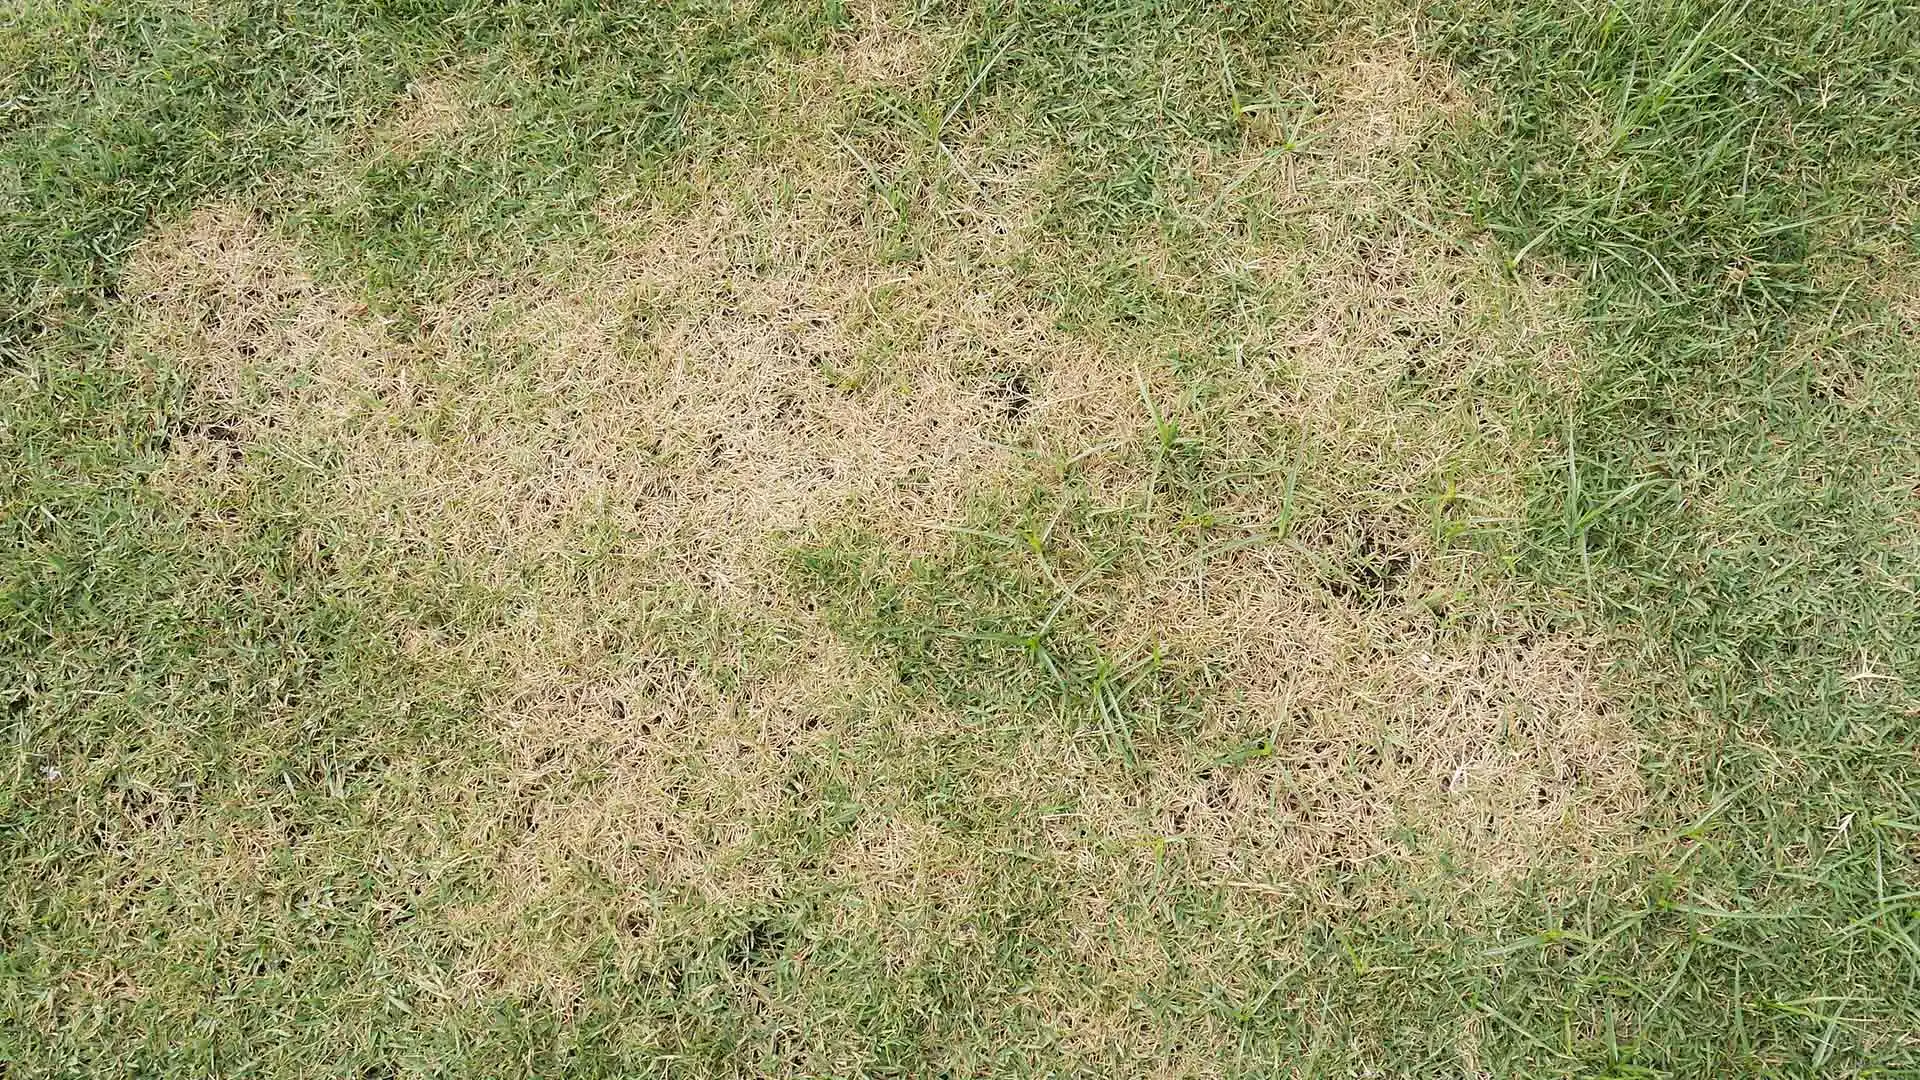 Here’s What to Do if You Suspect Your Lawn Is Infected With Brown Patch